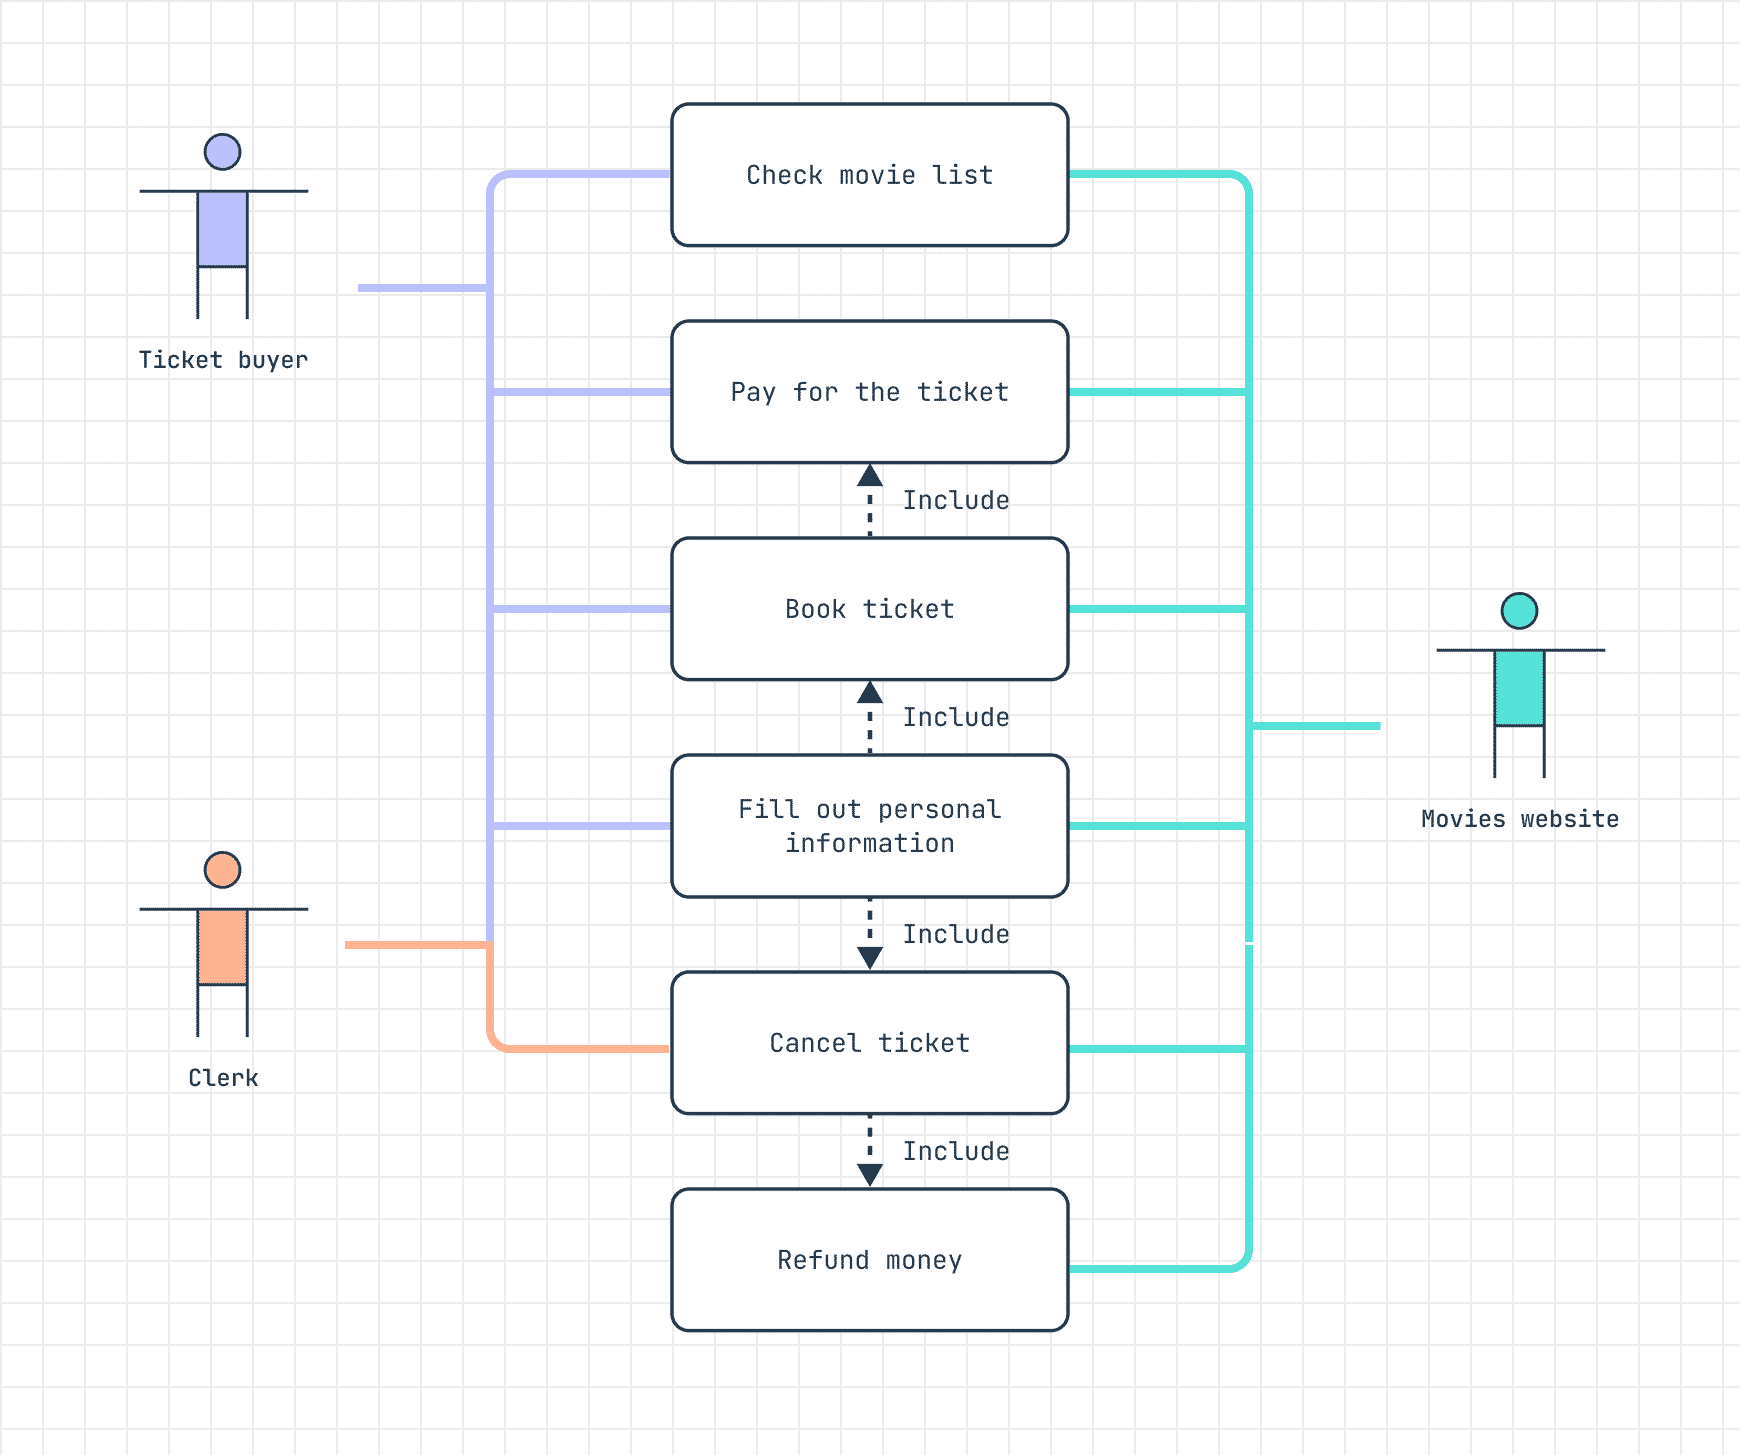 A use case diagram of movie ticket reservation system